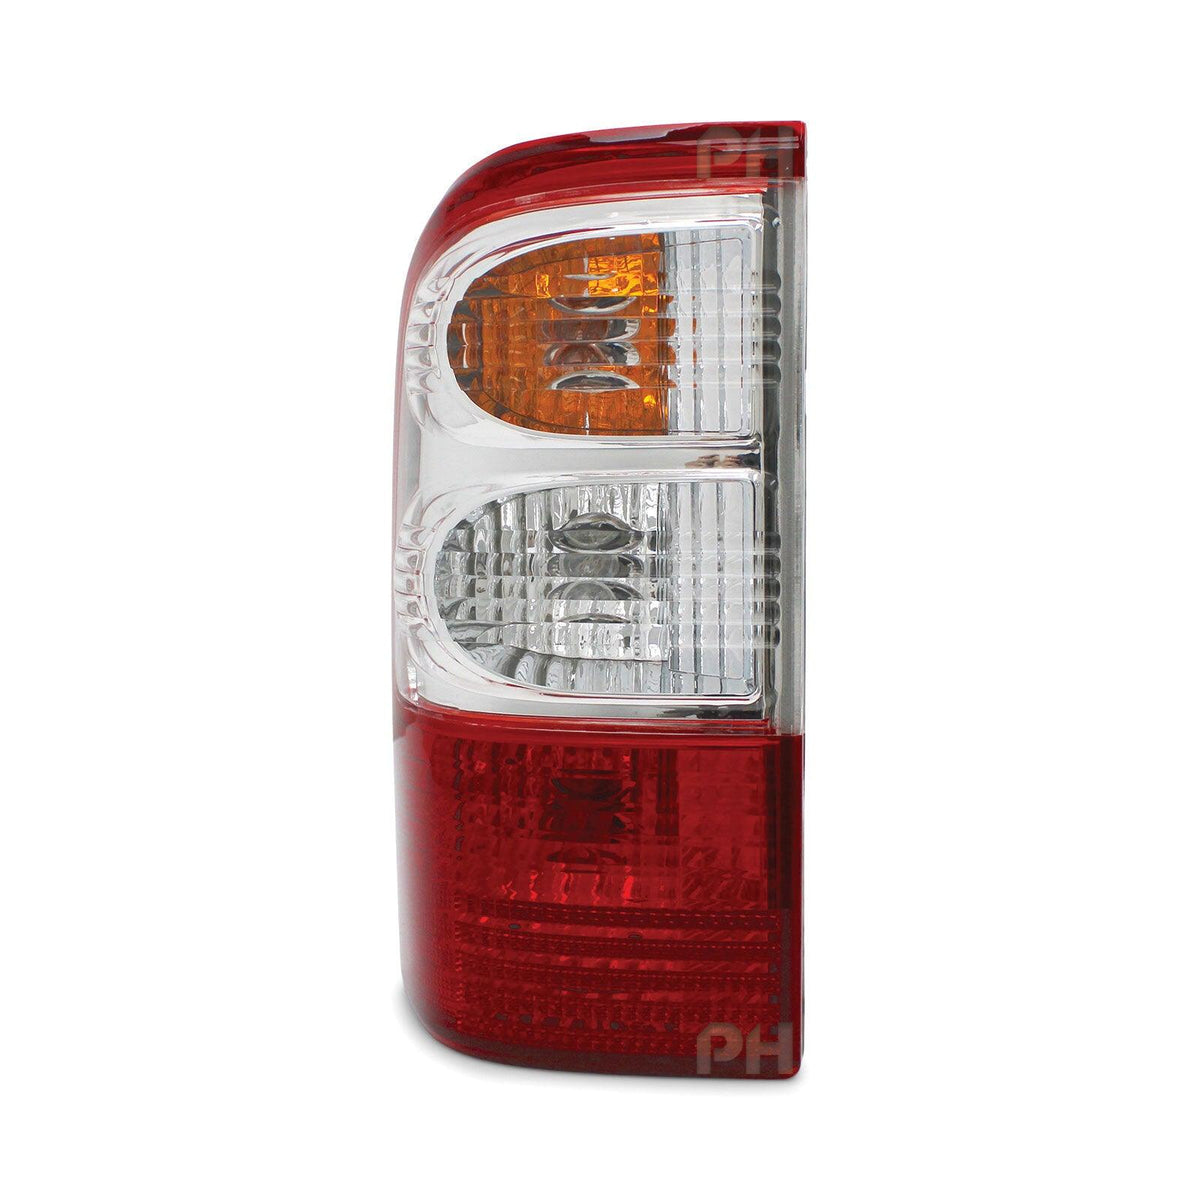 Panel House - Tail Light Upgrade Full Function LEFT fits Nissan Patrol GU Series 3 01 - 04 - 4X4OC™ | 4x4 Offroad Centre